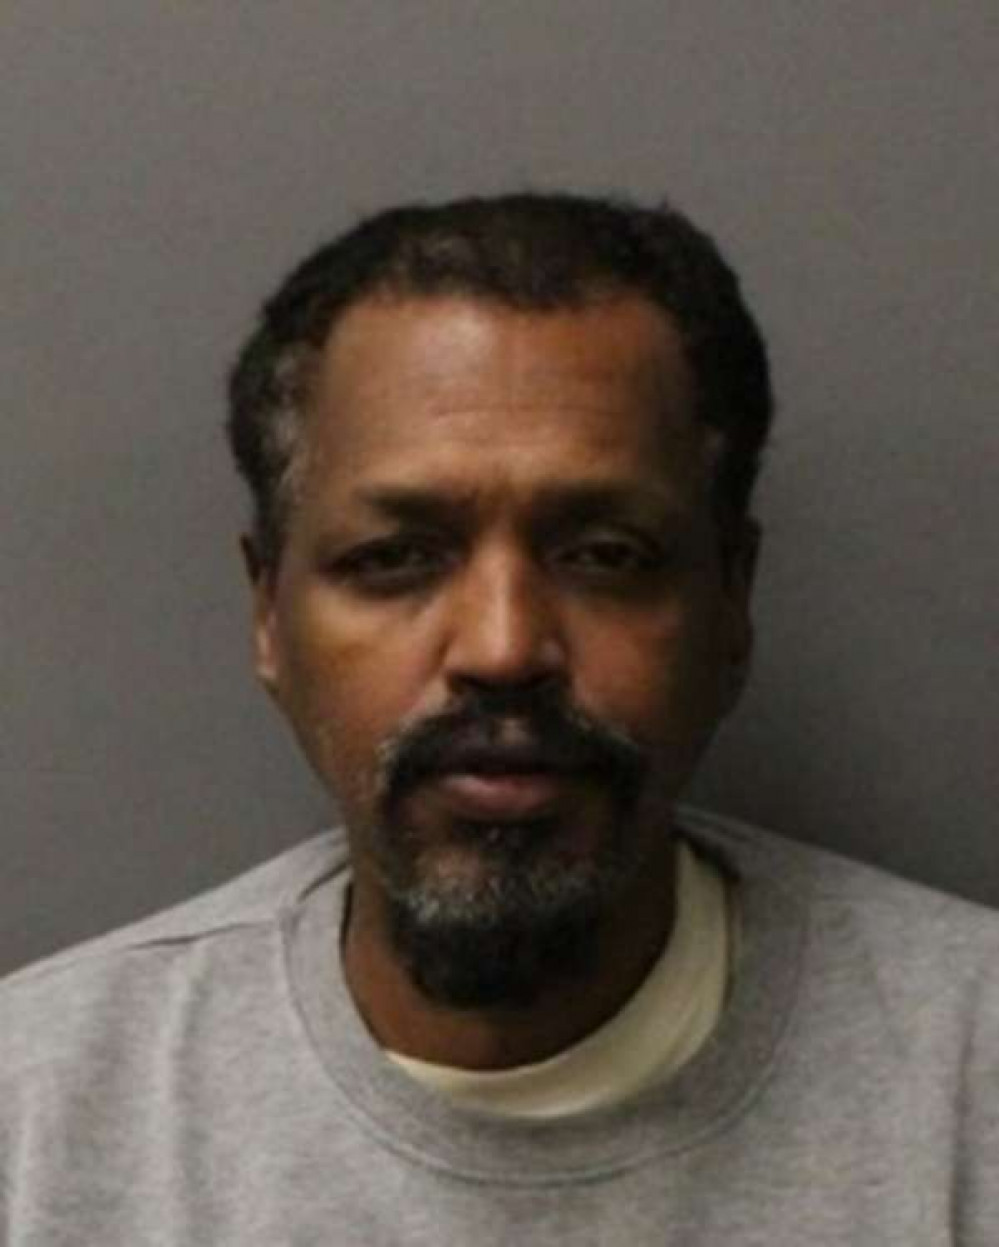 If you have seen Abdul Aziz Mohamed, or know of his whereabouts, you're urged to contact the police by calling 101. Image Credit: Hounslow Police